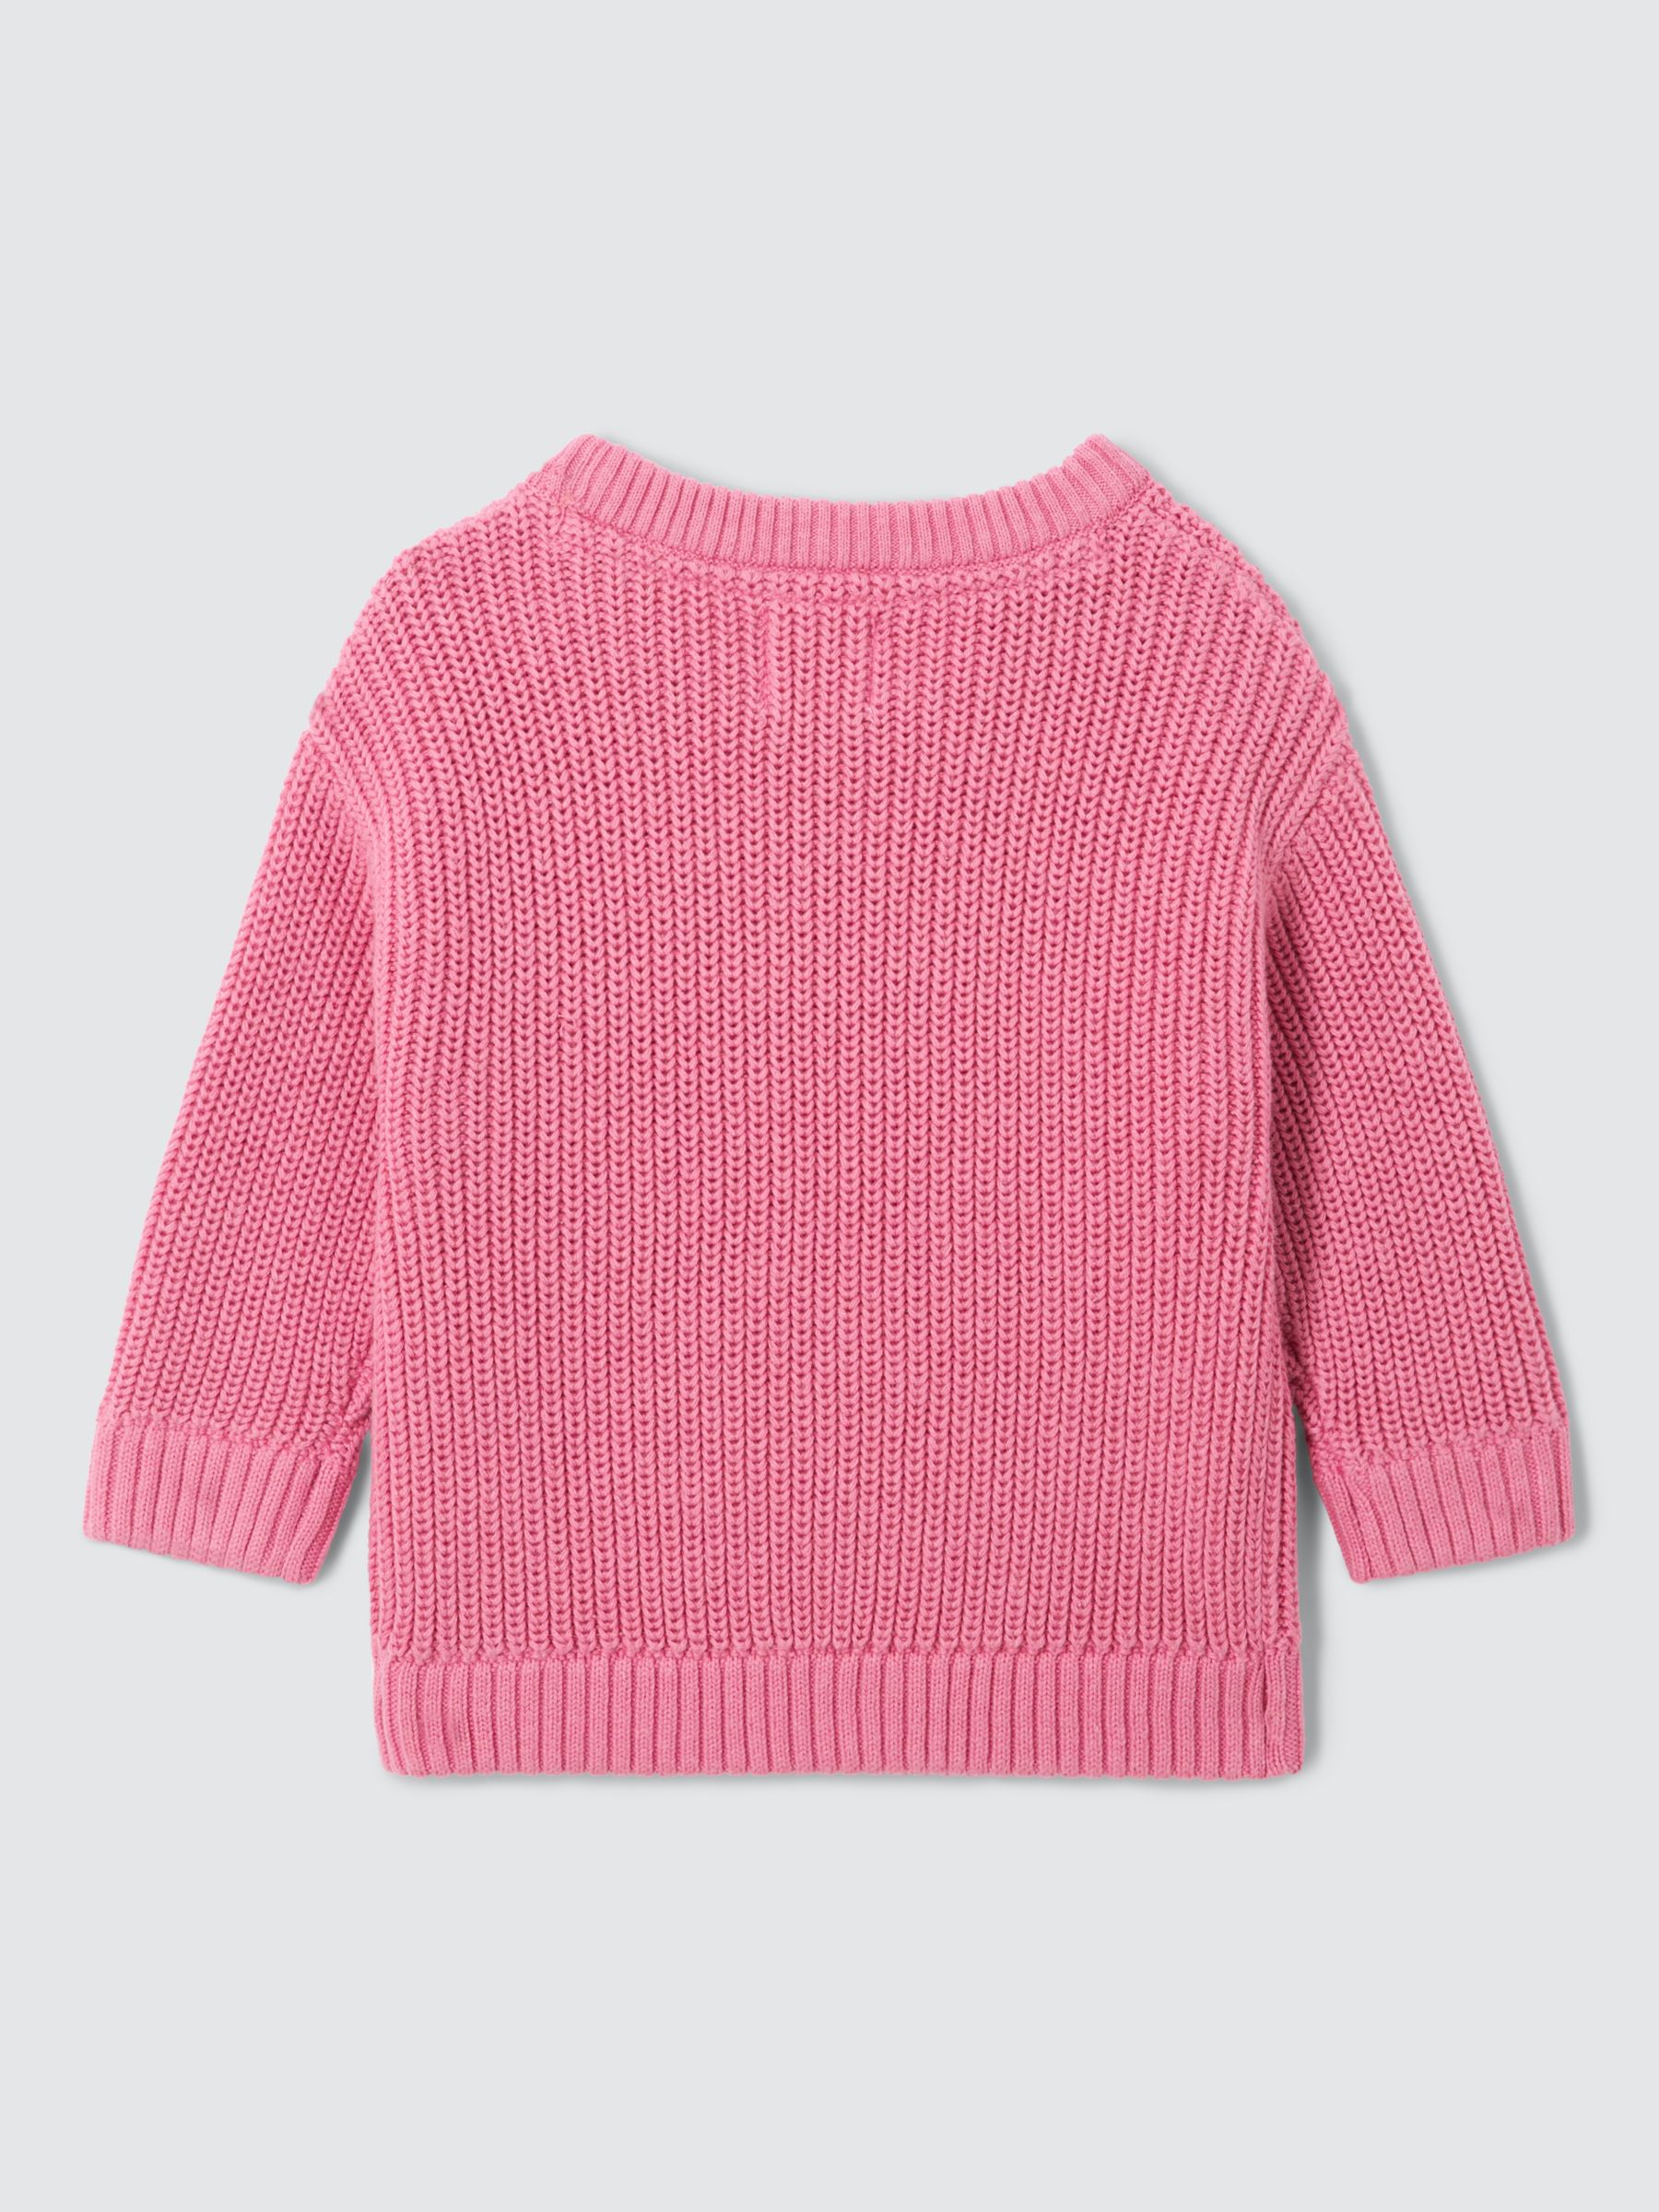 John Lewis ANYDAY Baby Knit Jumper, Pink, 9-12 months